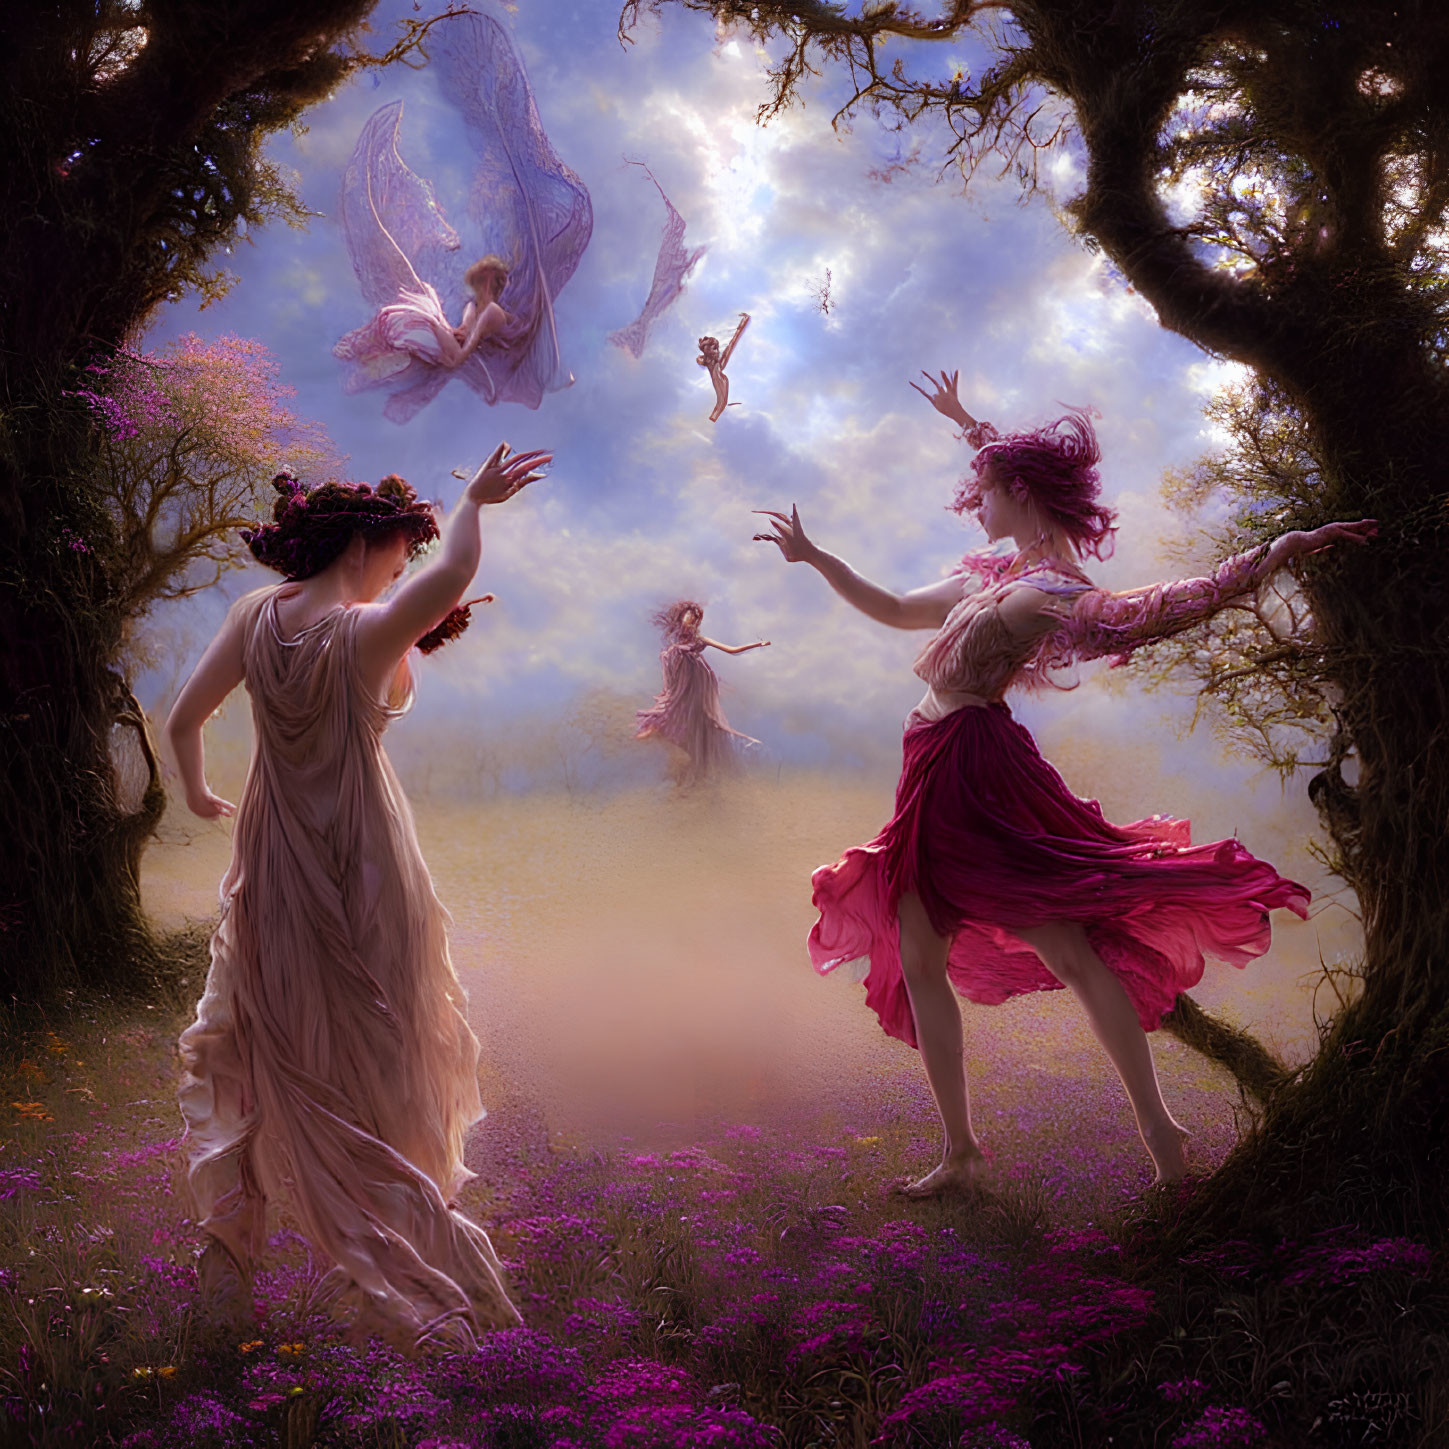 Ethereal figures dancing among blooming flowers in enchanted forest